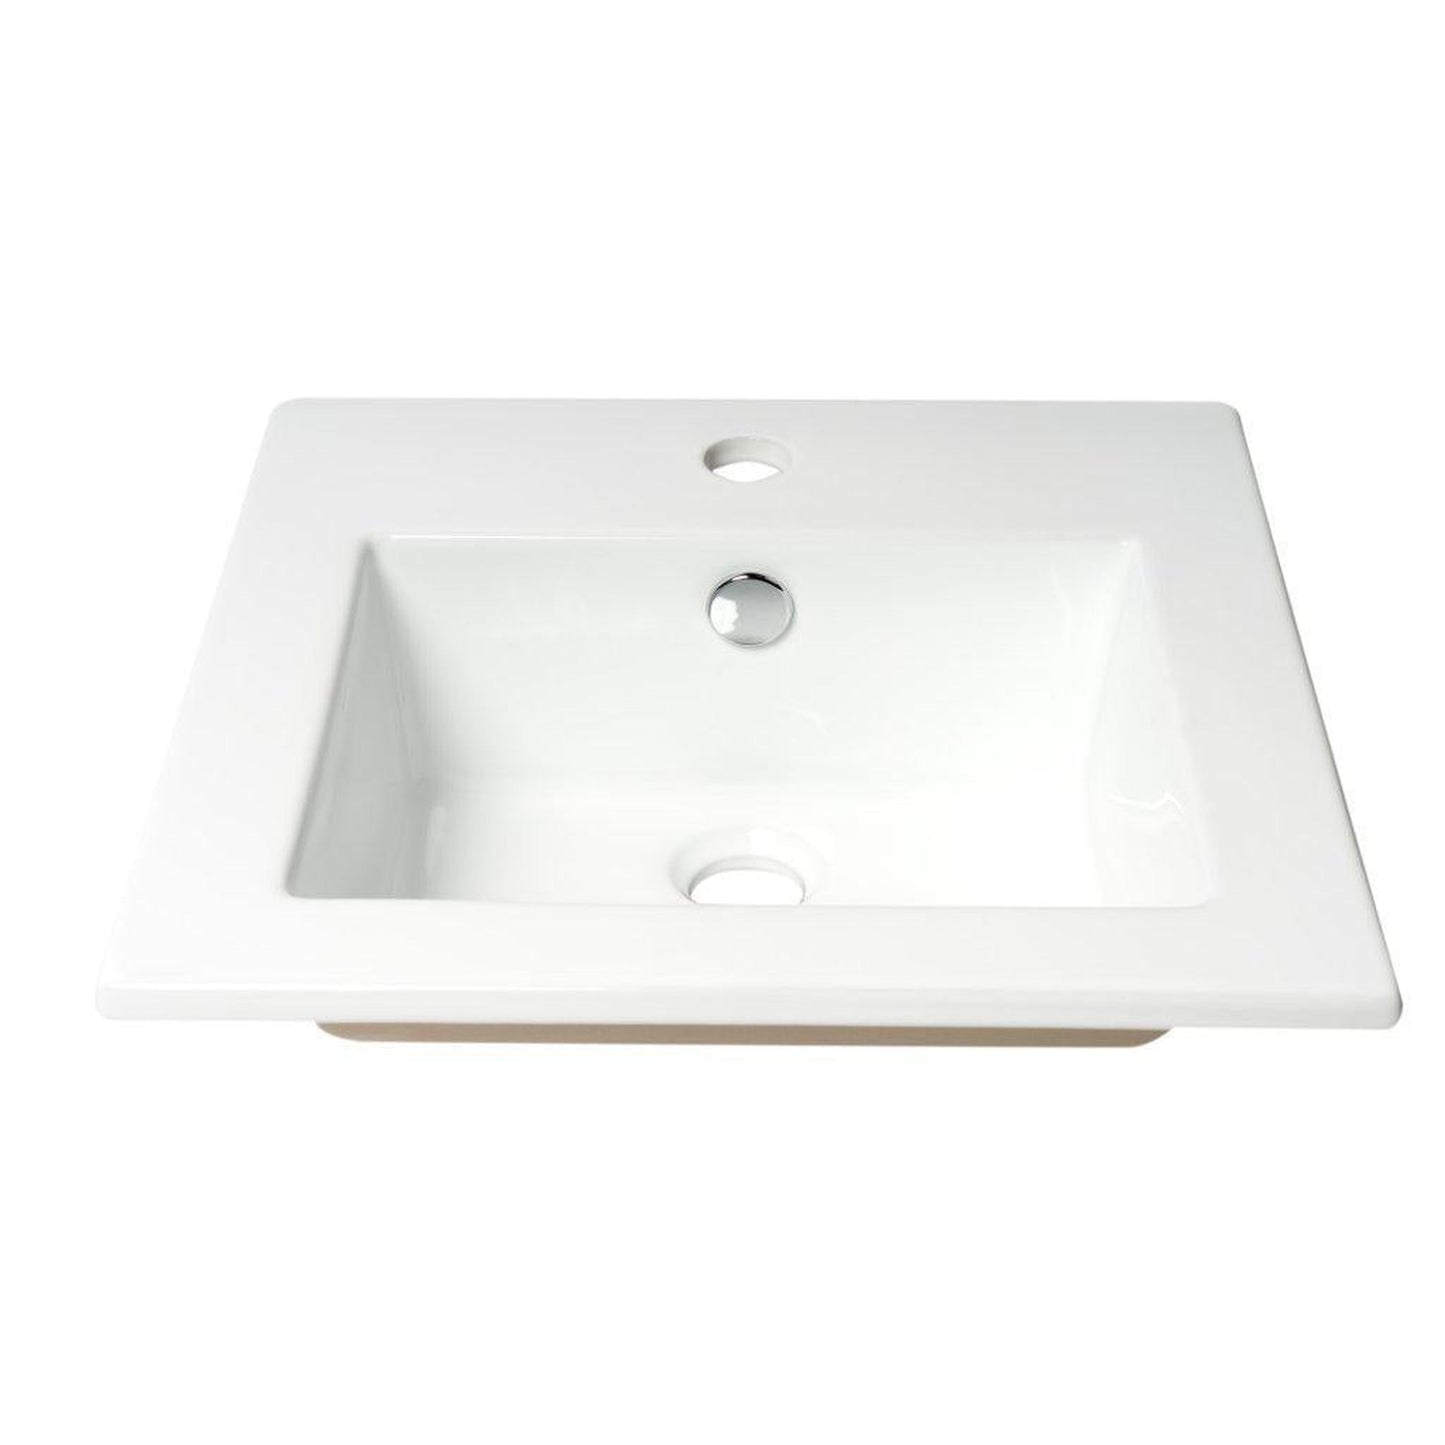 ALFI Brand ABC801 17" White Glossy Drop In Square Ceramic Bathroom Sink With Single Faucet Hole and Overflow